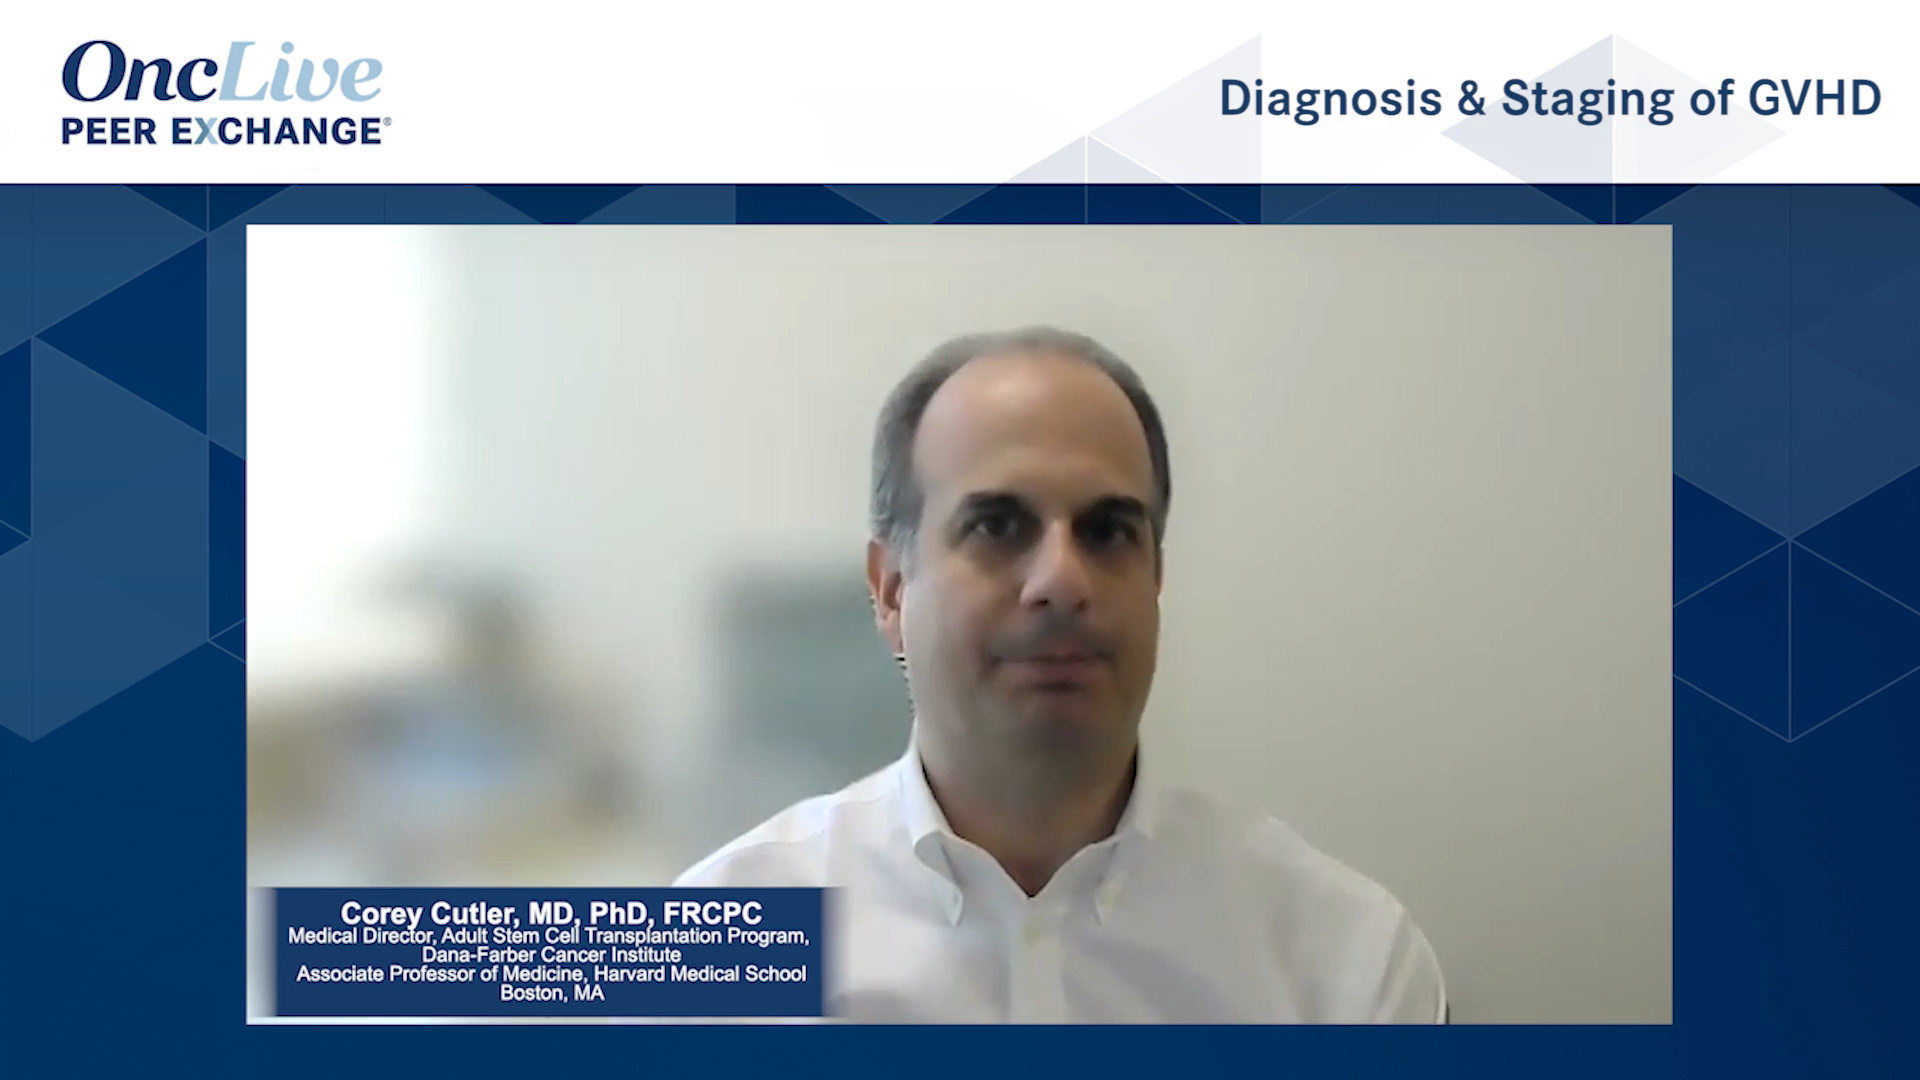 Diagnosing & Staging of GVHD